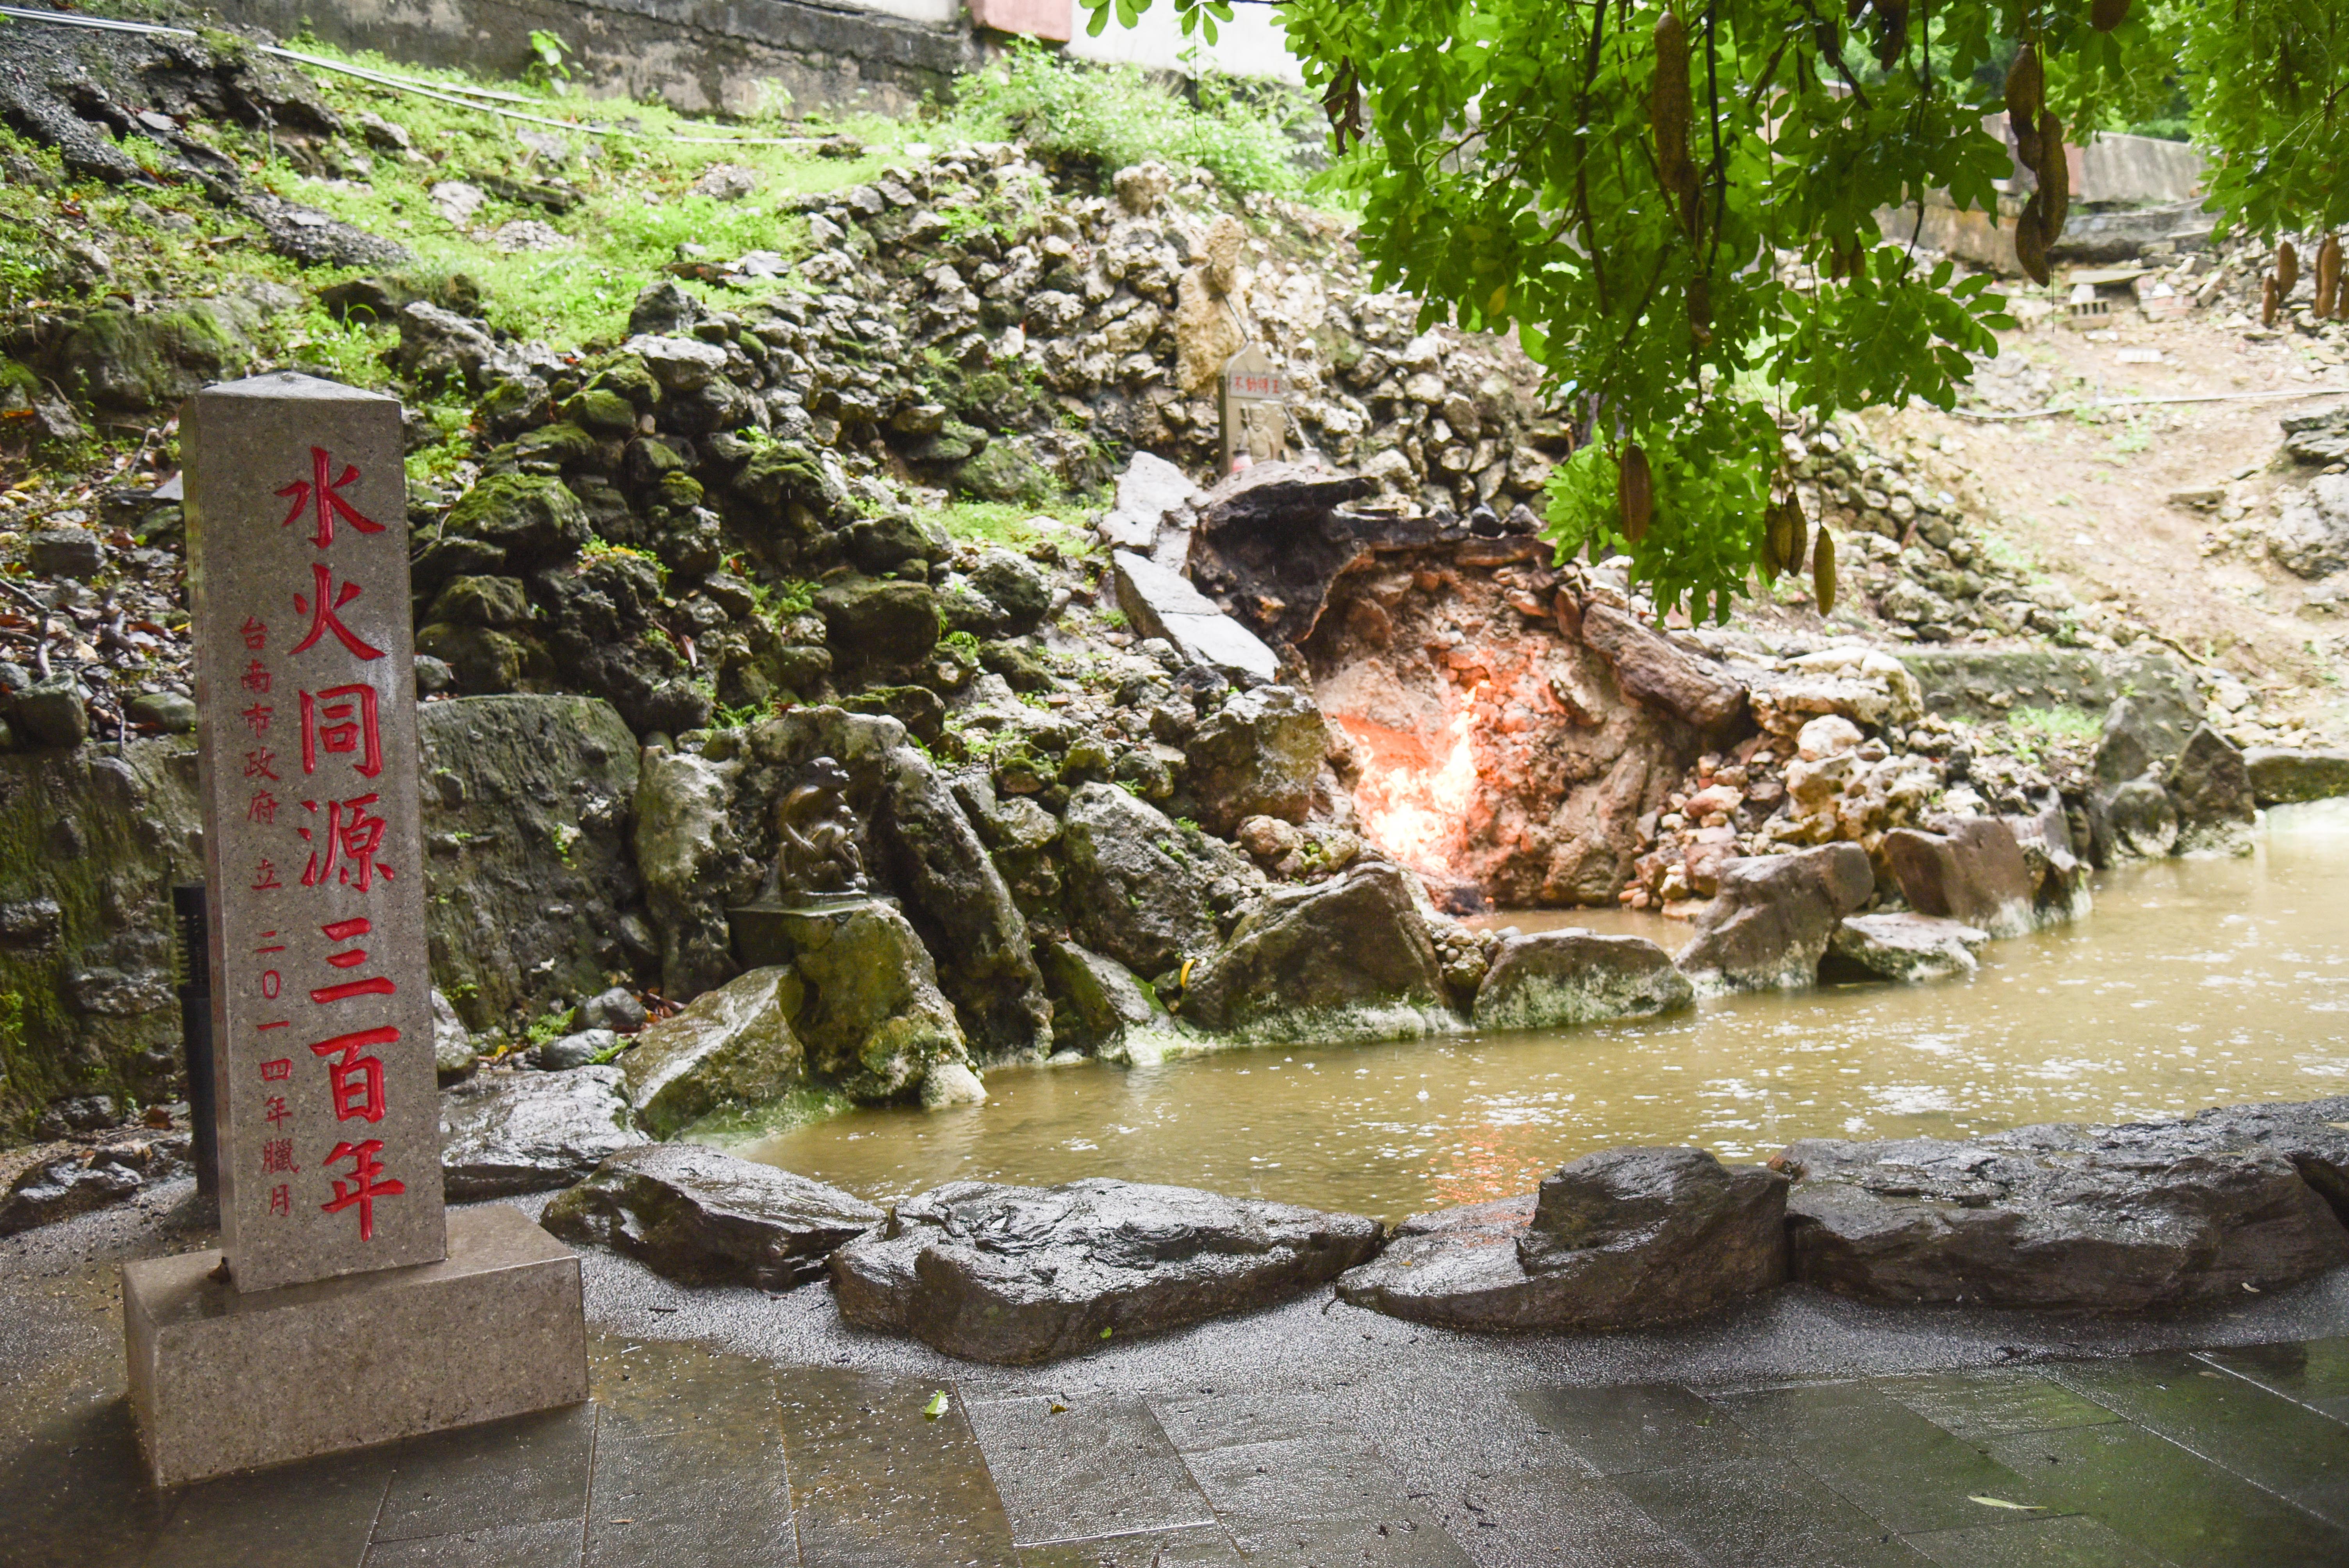 Fire and Water Spring - 300 years